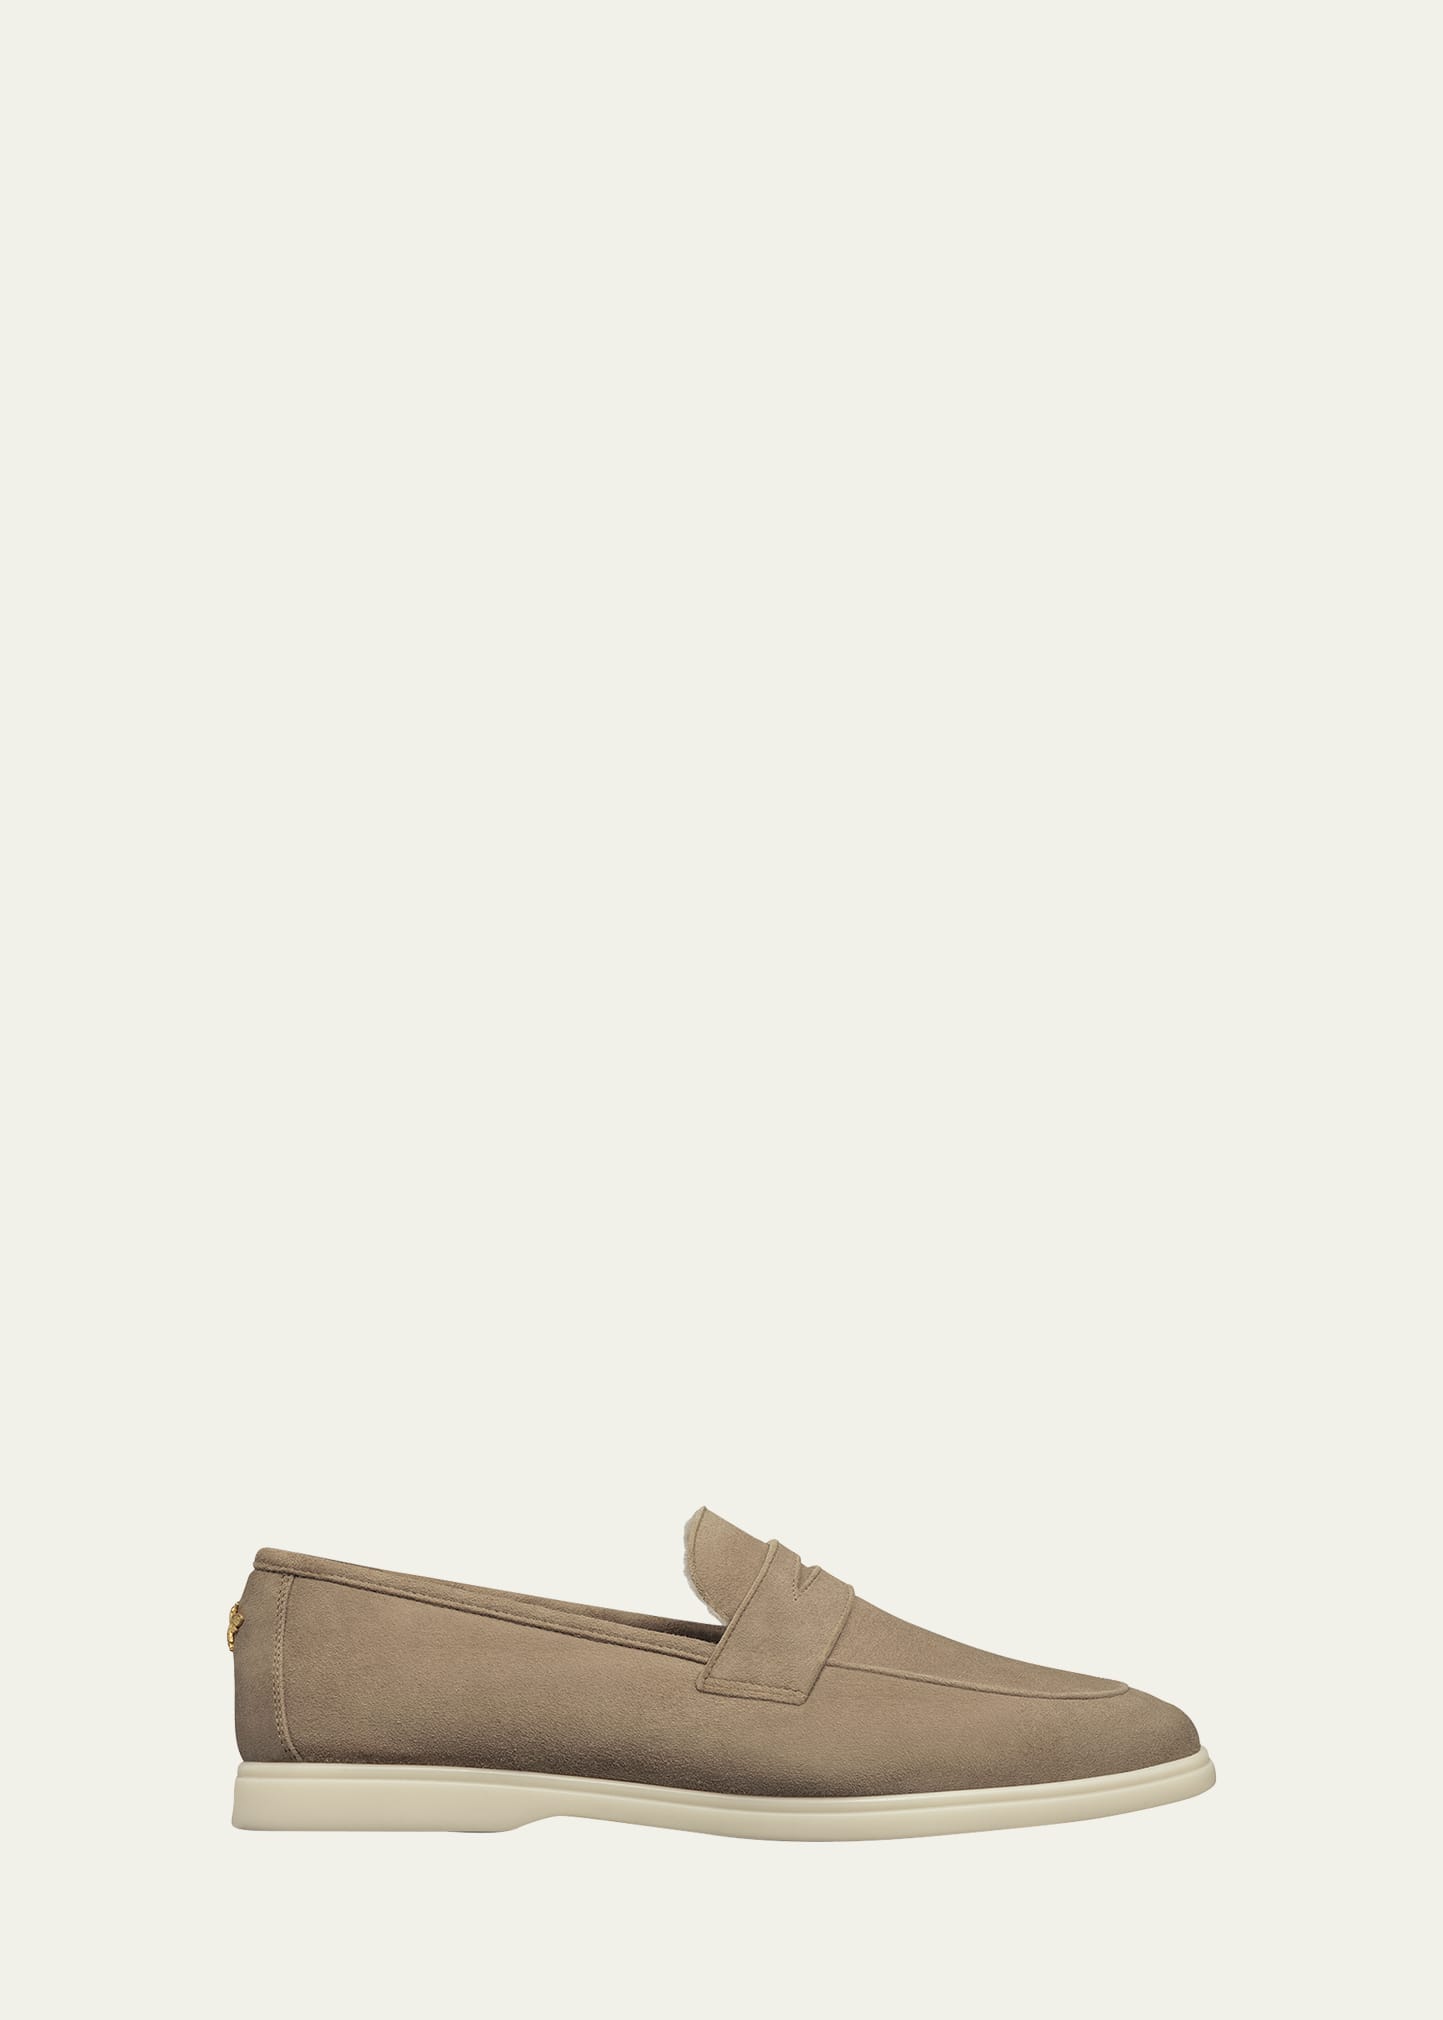 Bougeotte Suede Shearling Sporty Penny Loafers